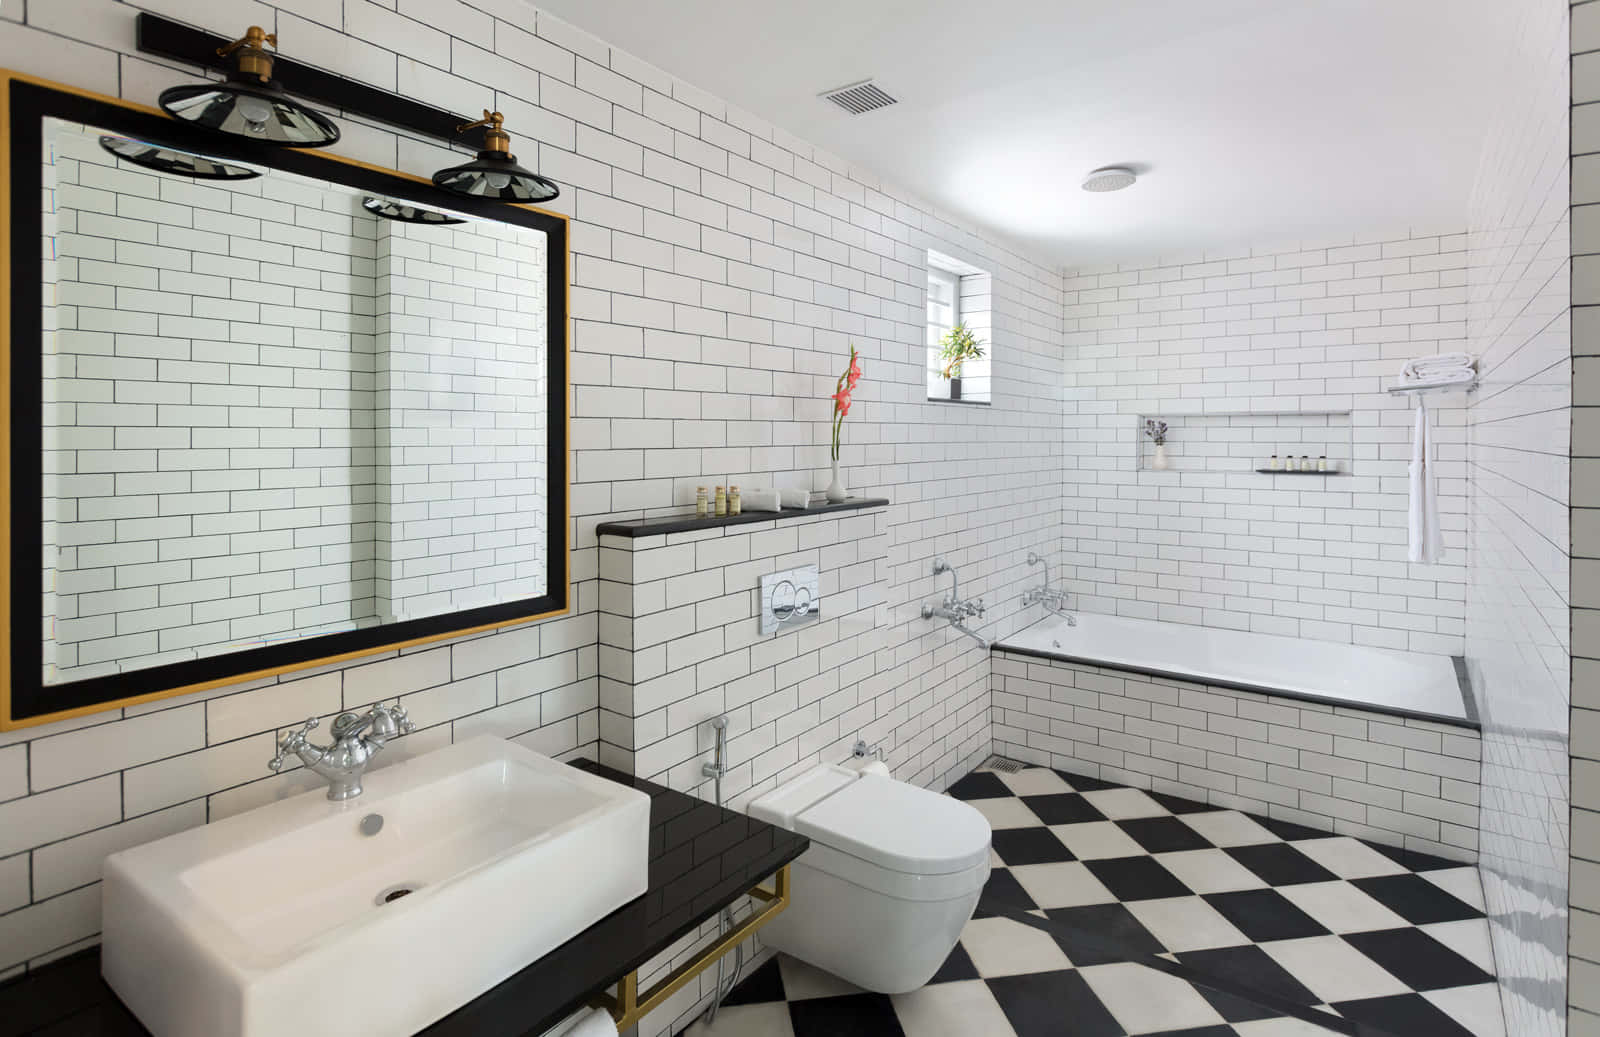 A Bathroom With A Black And White Checkered Floor